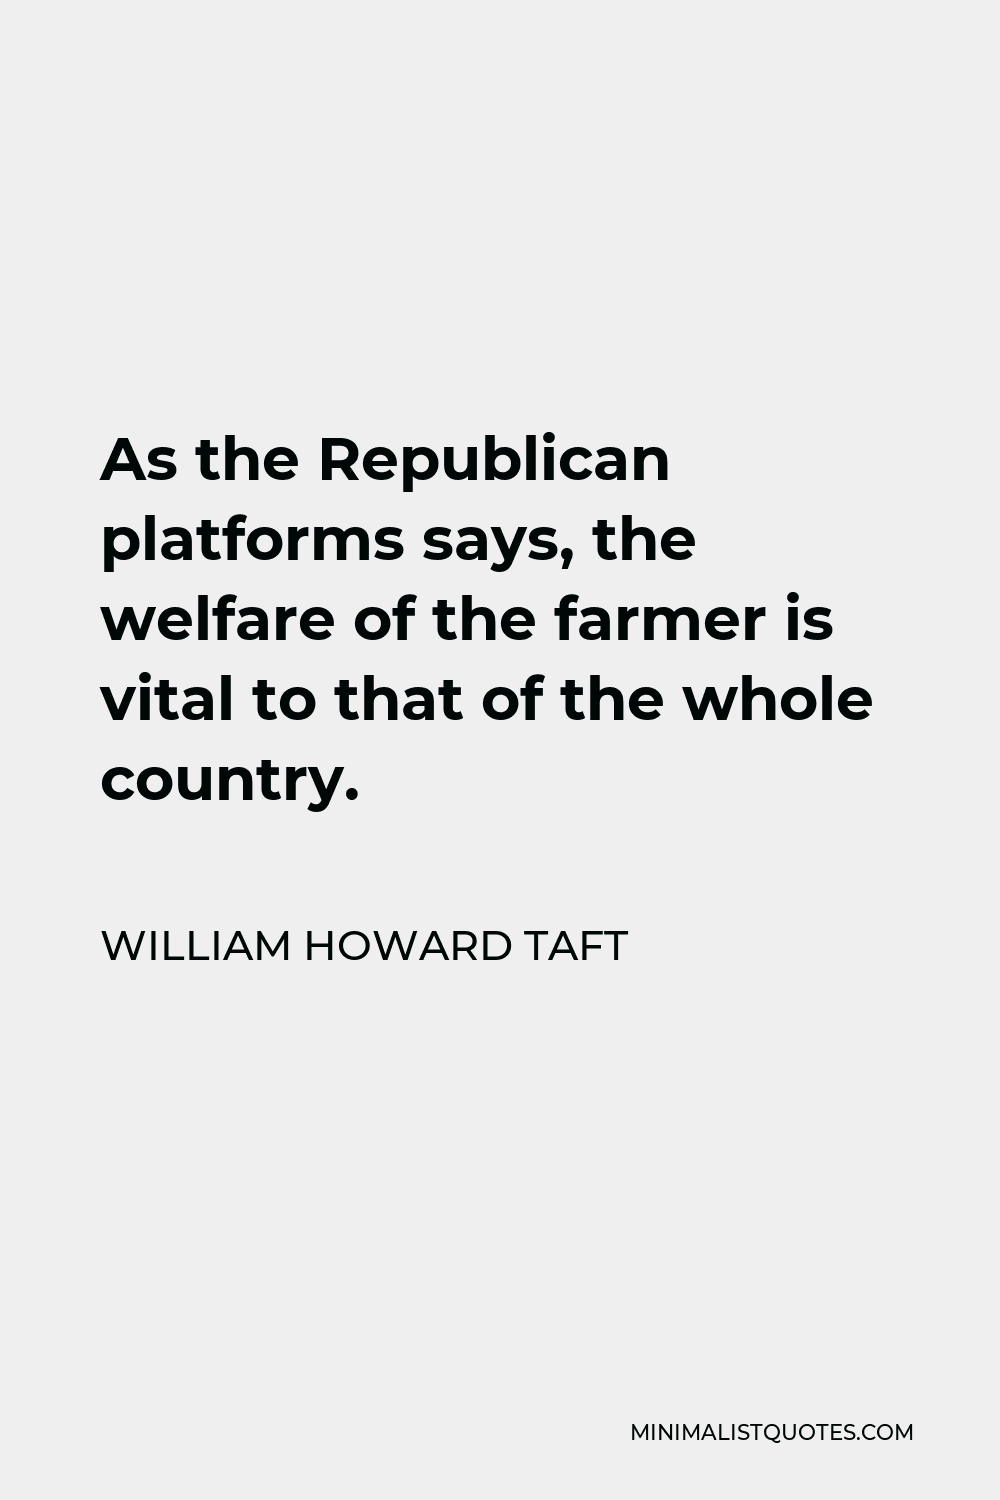 William Howard Taft Quote - As the Republican platforms says, the welfare of the farmer is vital to that of the whole country.